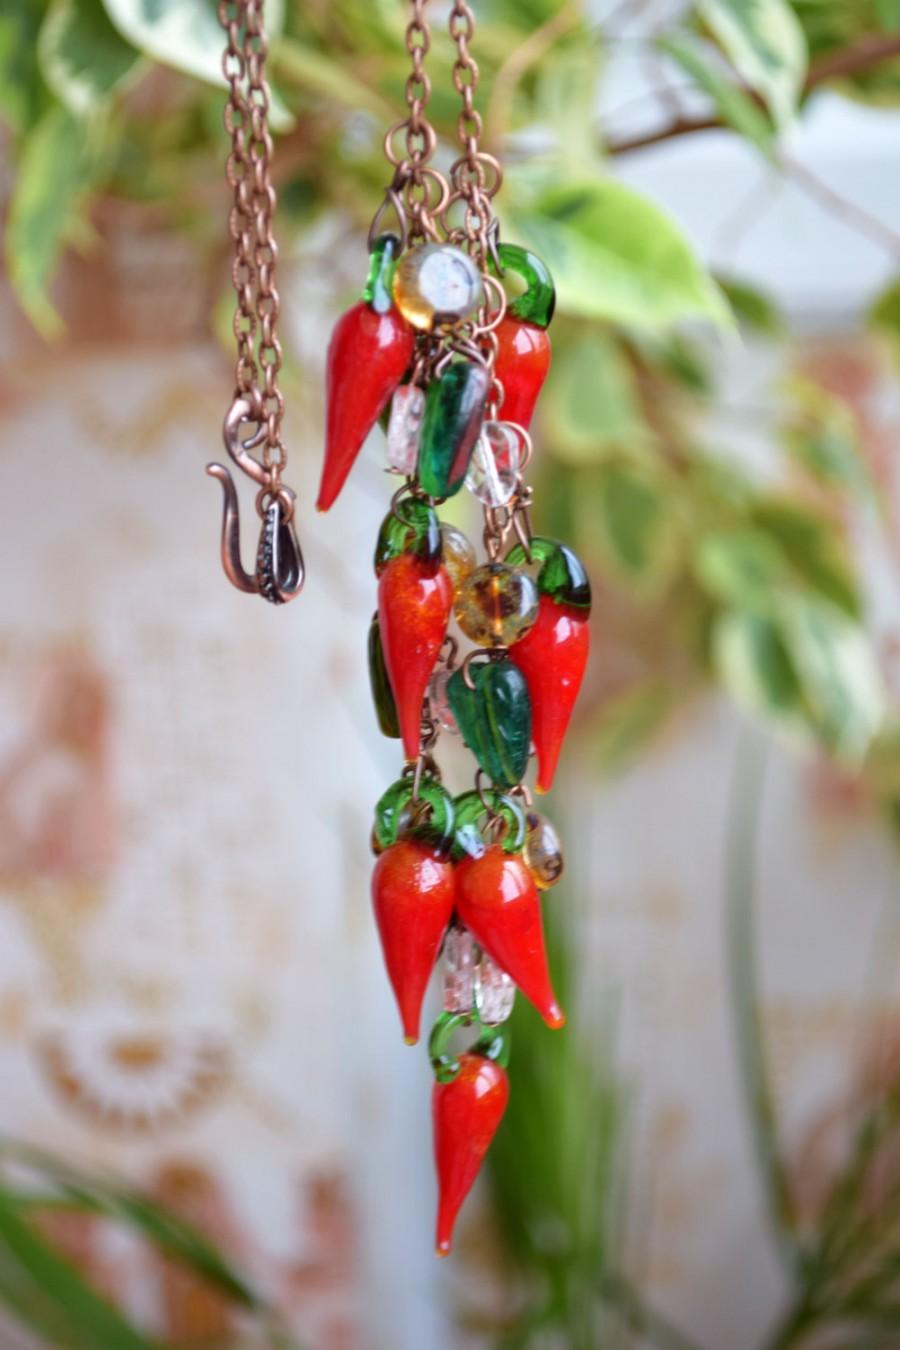 Wedding - Glass Chili Pepper necklace-Fall necklace-Autumn jewelry-Lampwork beads necklace girlfriend gift hot chilli pepper glass necklace-red-green